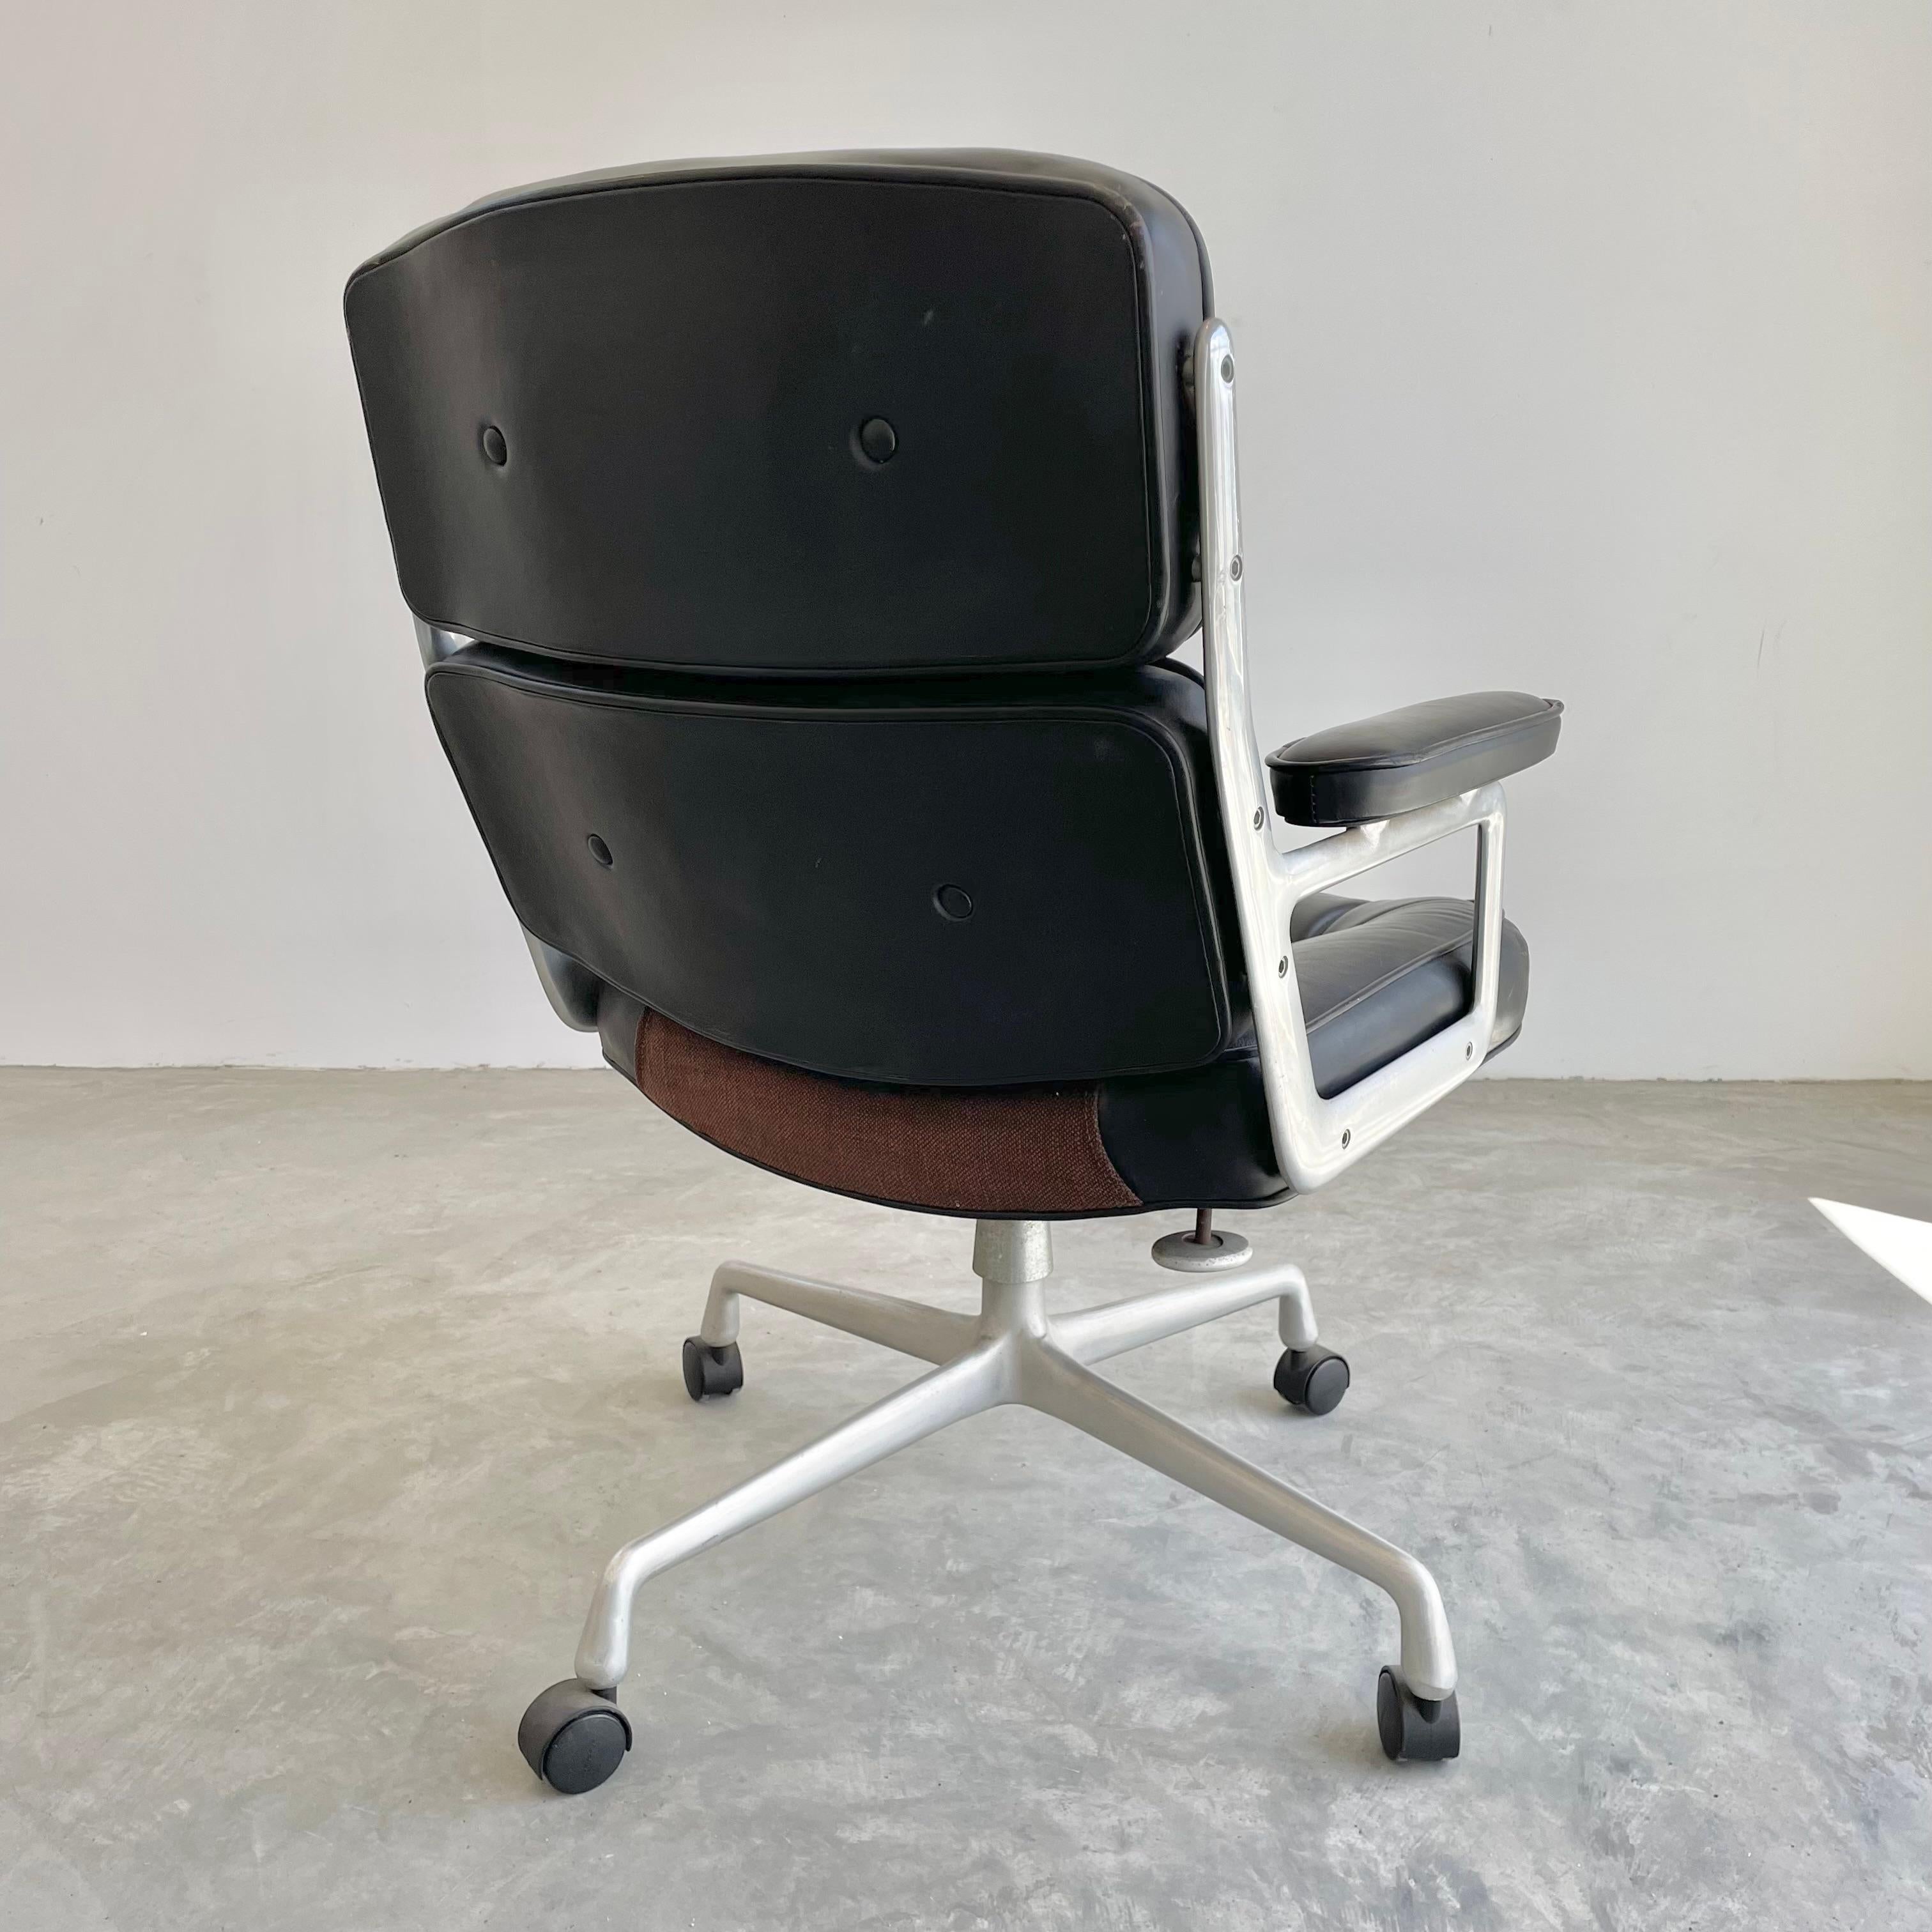 Mid-Century Modern Eames Time Life Chair in Black Leather for Herman Miller, 1970s USA